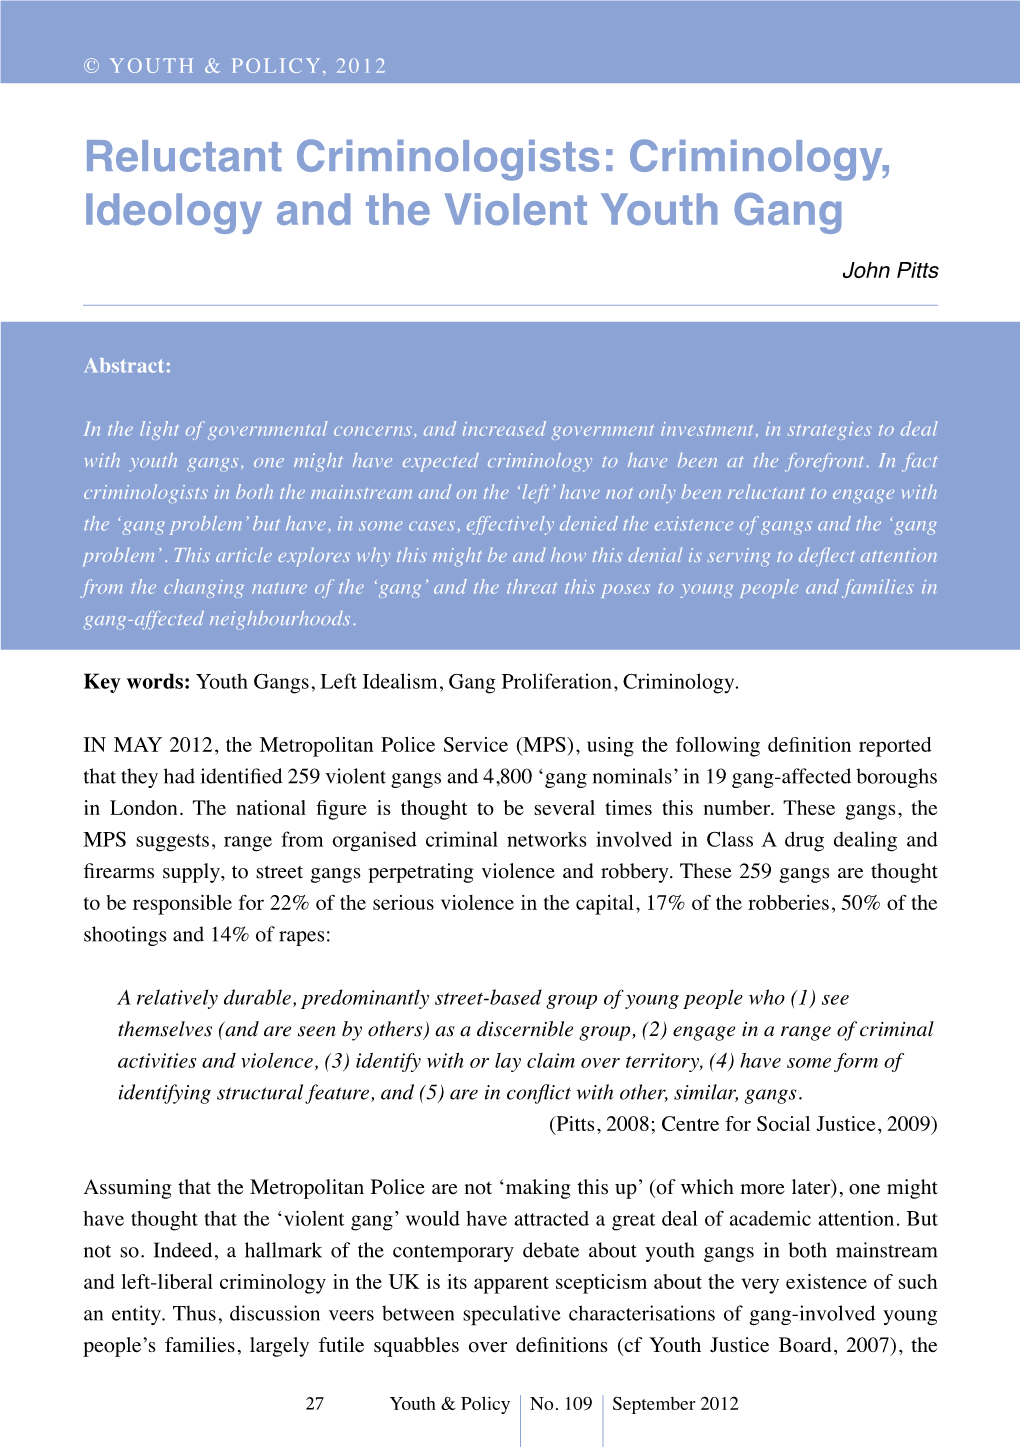 Reluctant Criminologists: Criminology, Ideology and the Violent Youth Gang John Pitts